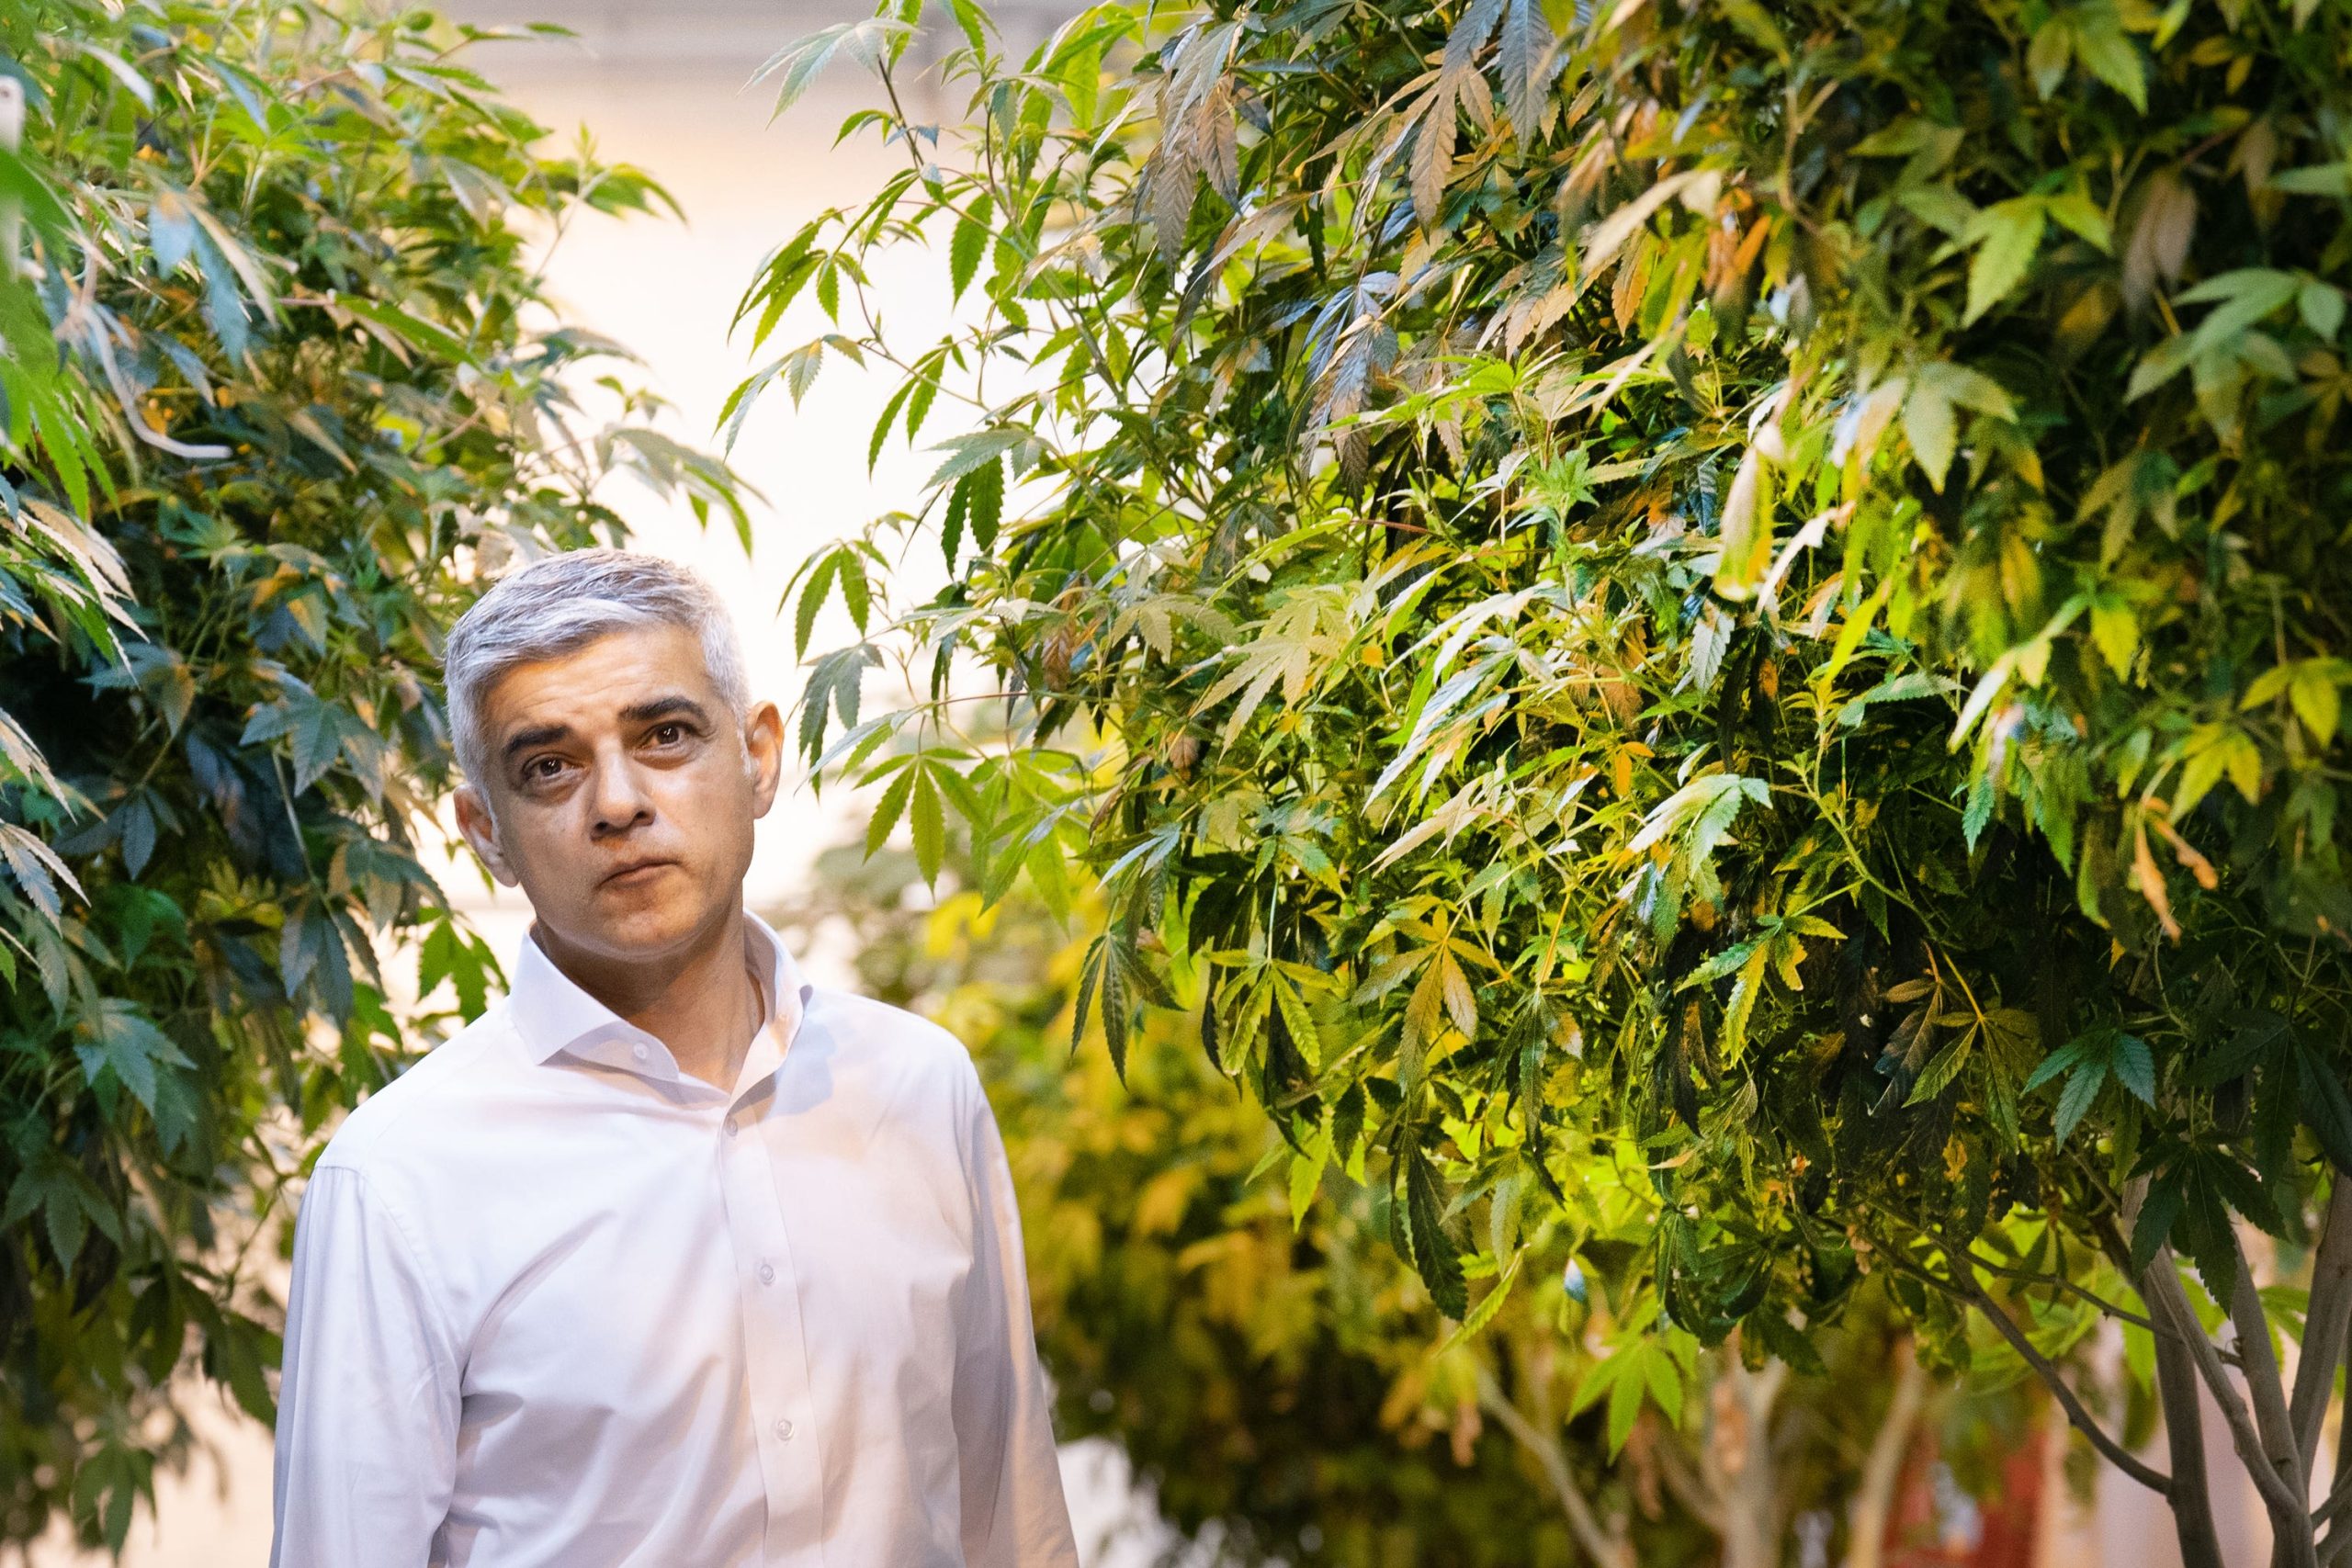 ‘We need a grown-up discussion’: Should cannabis be legalised in the UK?